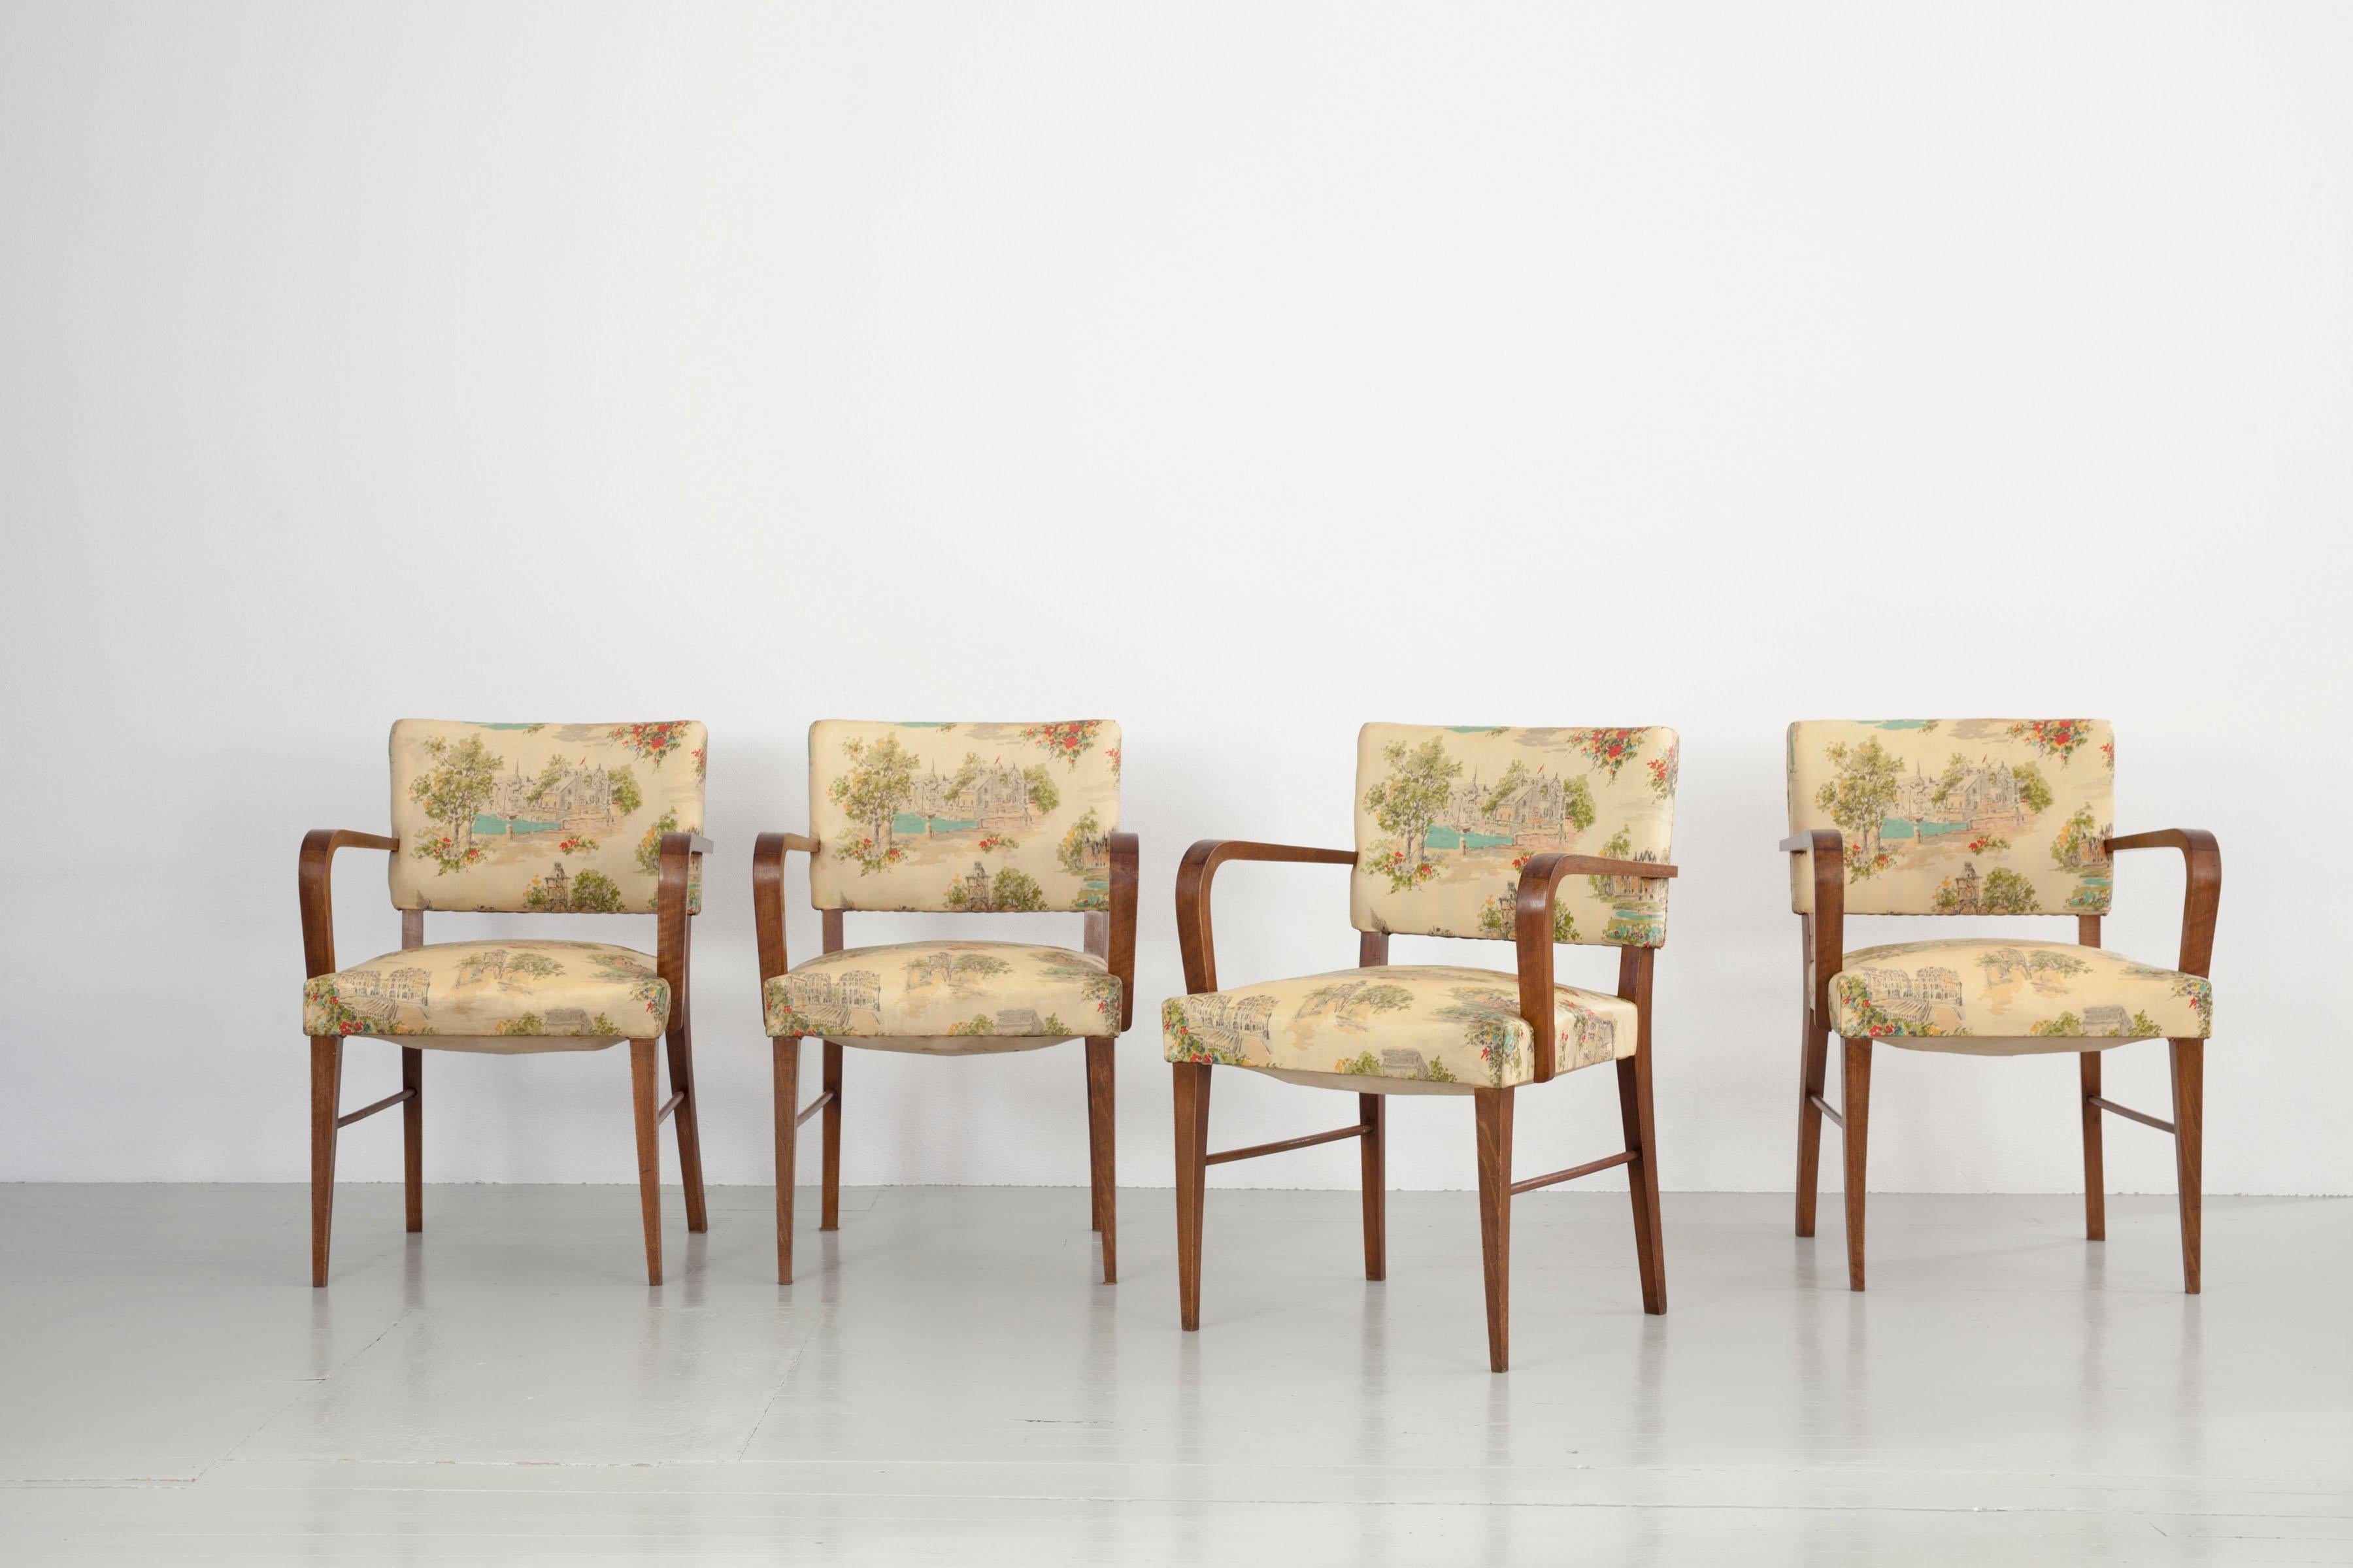 Mid-Century Modern Set of 4 Italian Authentic Armchairs, Chintz Cover and Landscape Scenery, 1930s For Sale